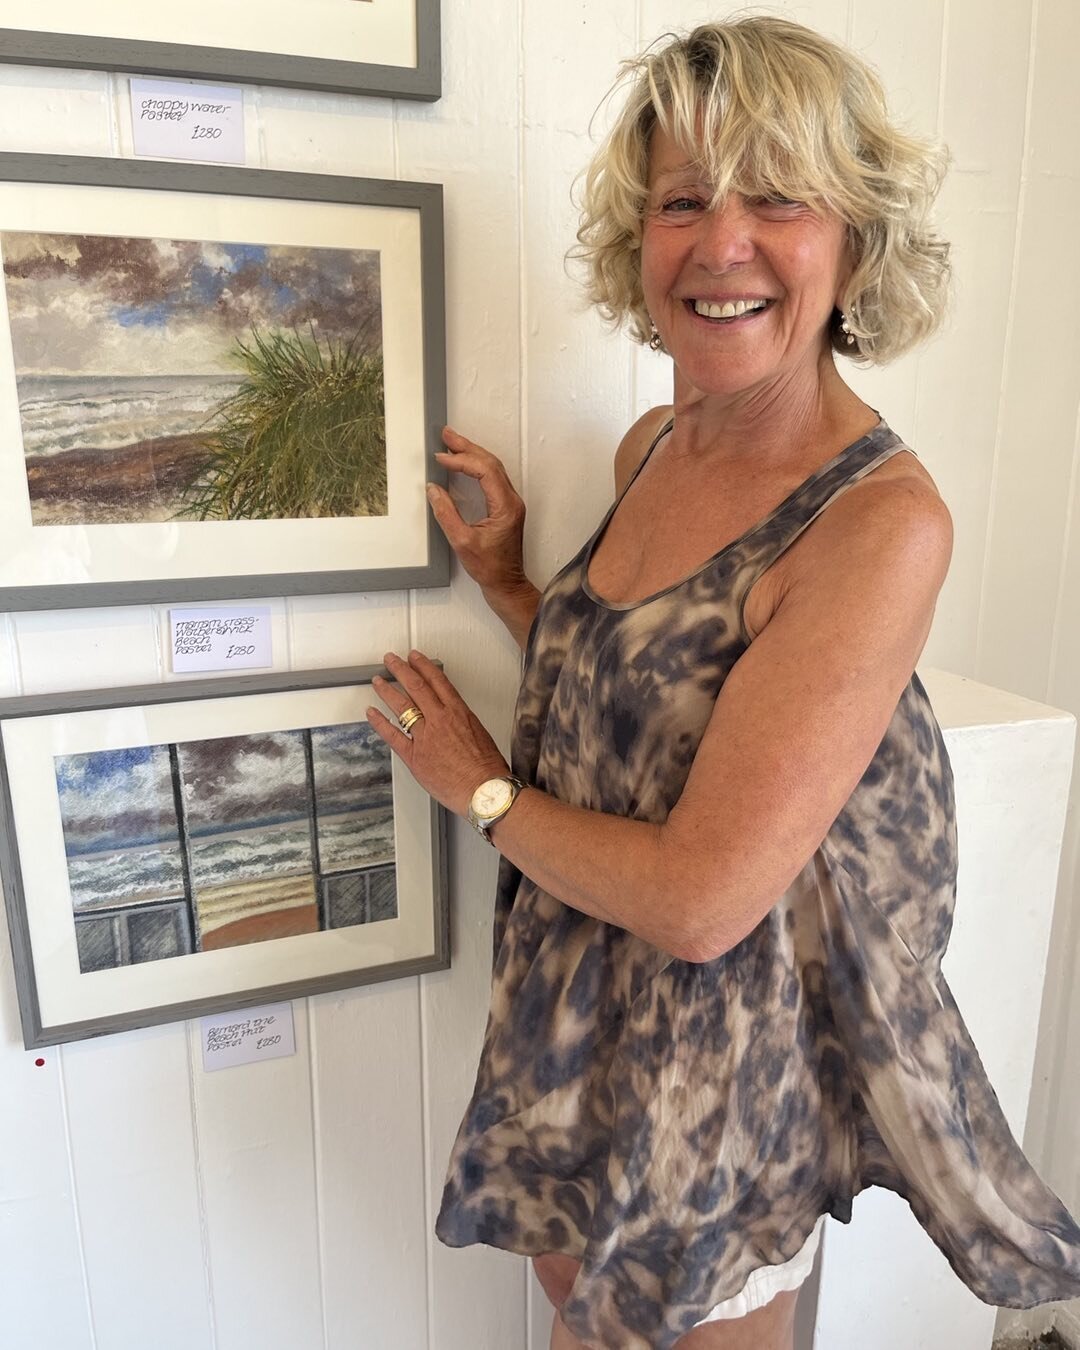 Helen Atkinson Wood finishes hanging her show which opens today at the Aldeburgh Beach Lookout.